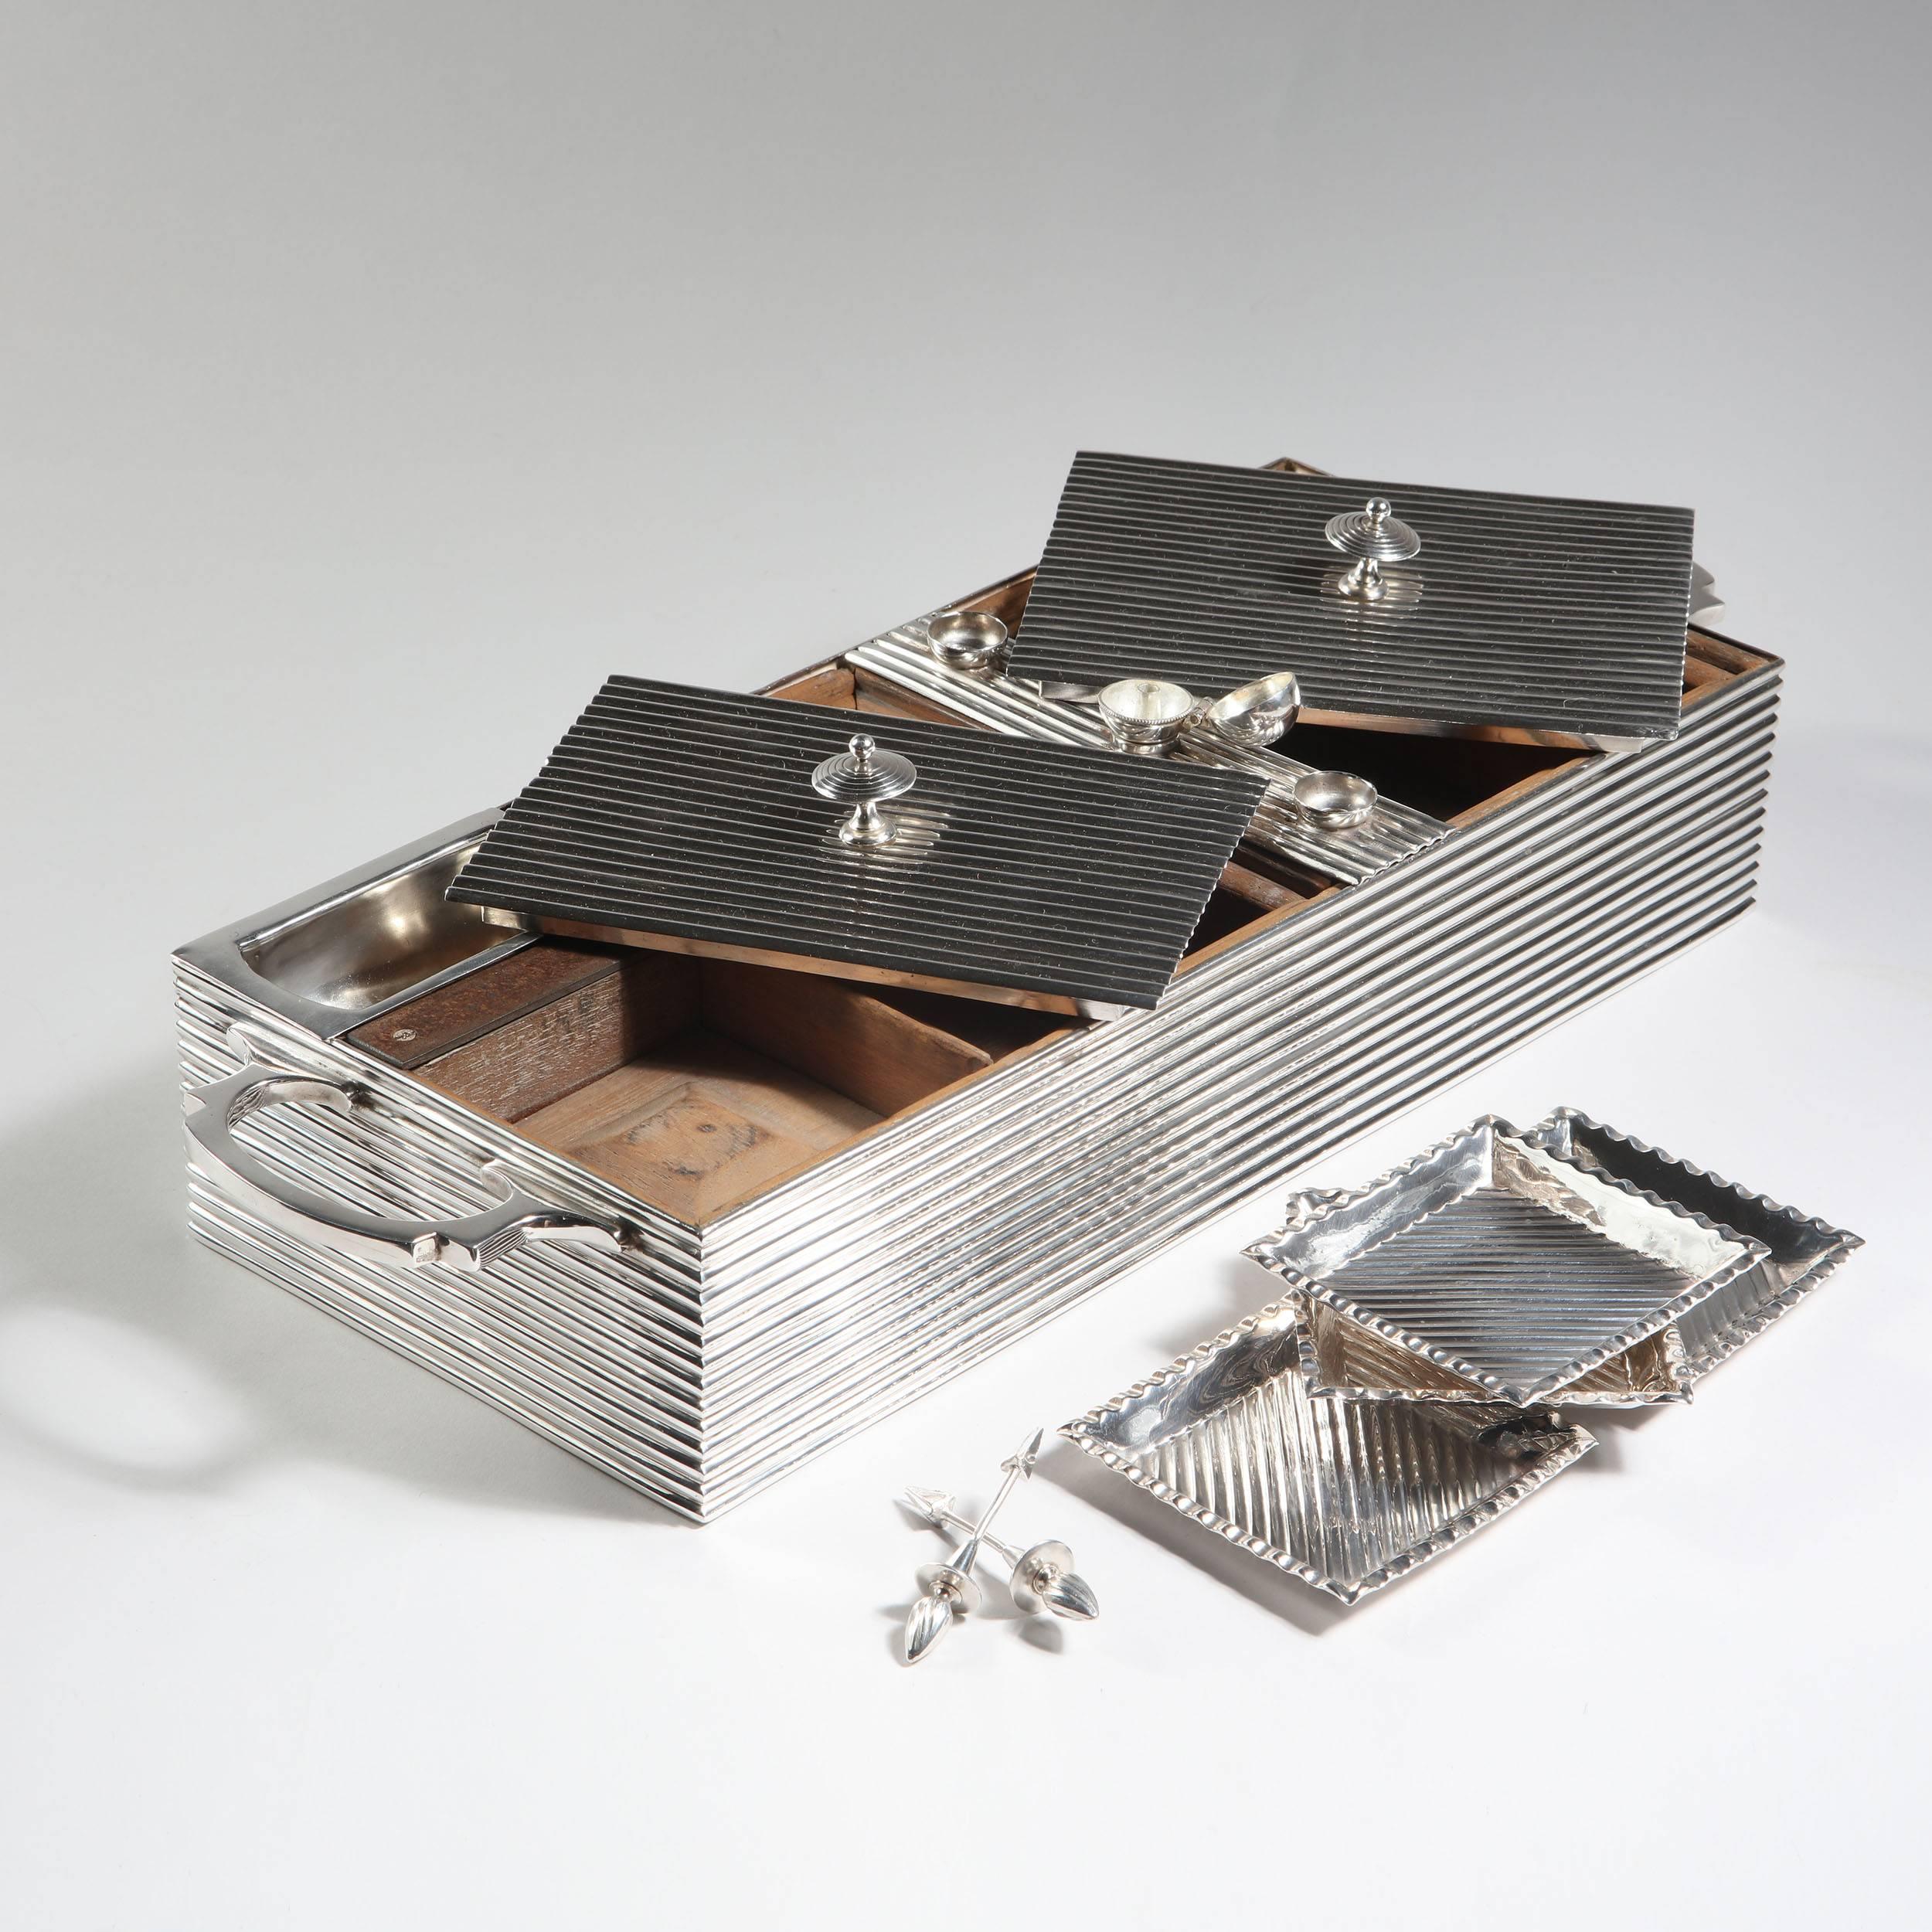 Early 20th Century Silver Vintage Cigar Box Compendium In Excellent Condition In London, by appointment only